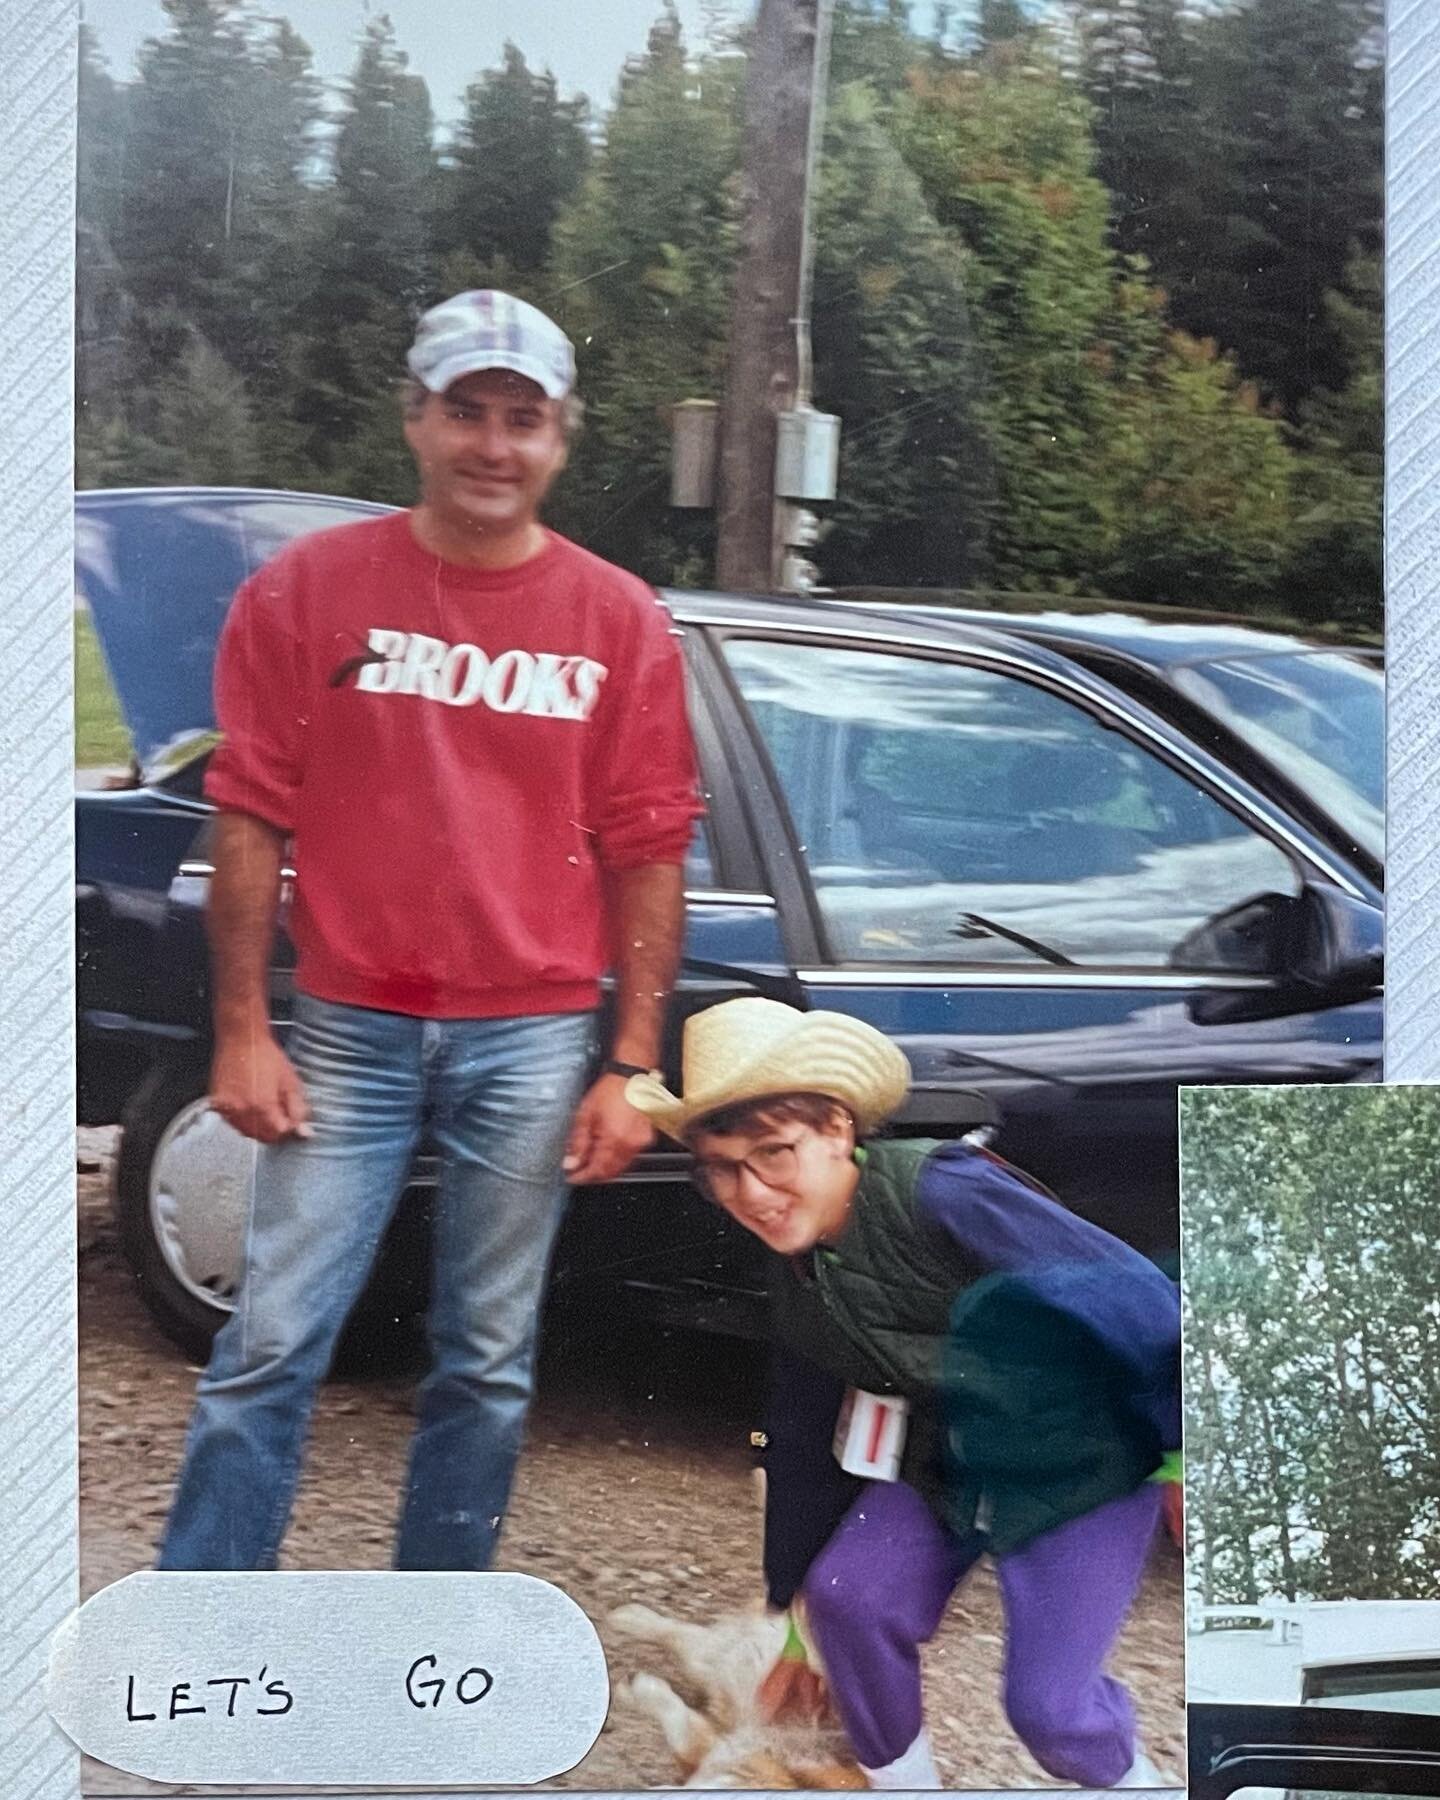 What&rsquo;s clear from this fuzzy photo from 1991 is that I have an awesome dad. 

It&rsquo;s pretty rad when your dad&rsquo;s name is the same as a shoe company&hellip; he wore lots of Brooks sweatshirts and baseball caps. He told me it was &ldquo;